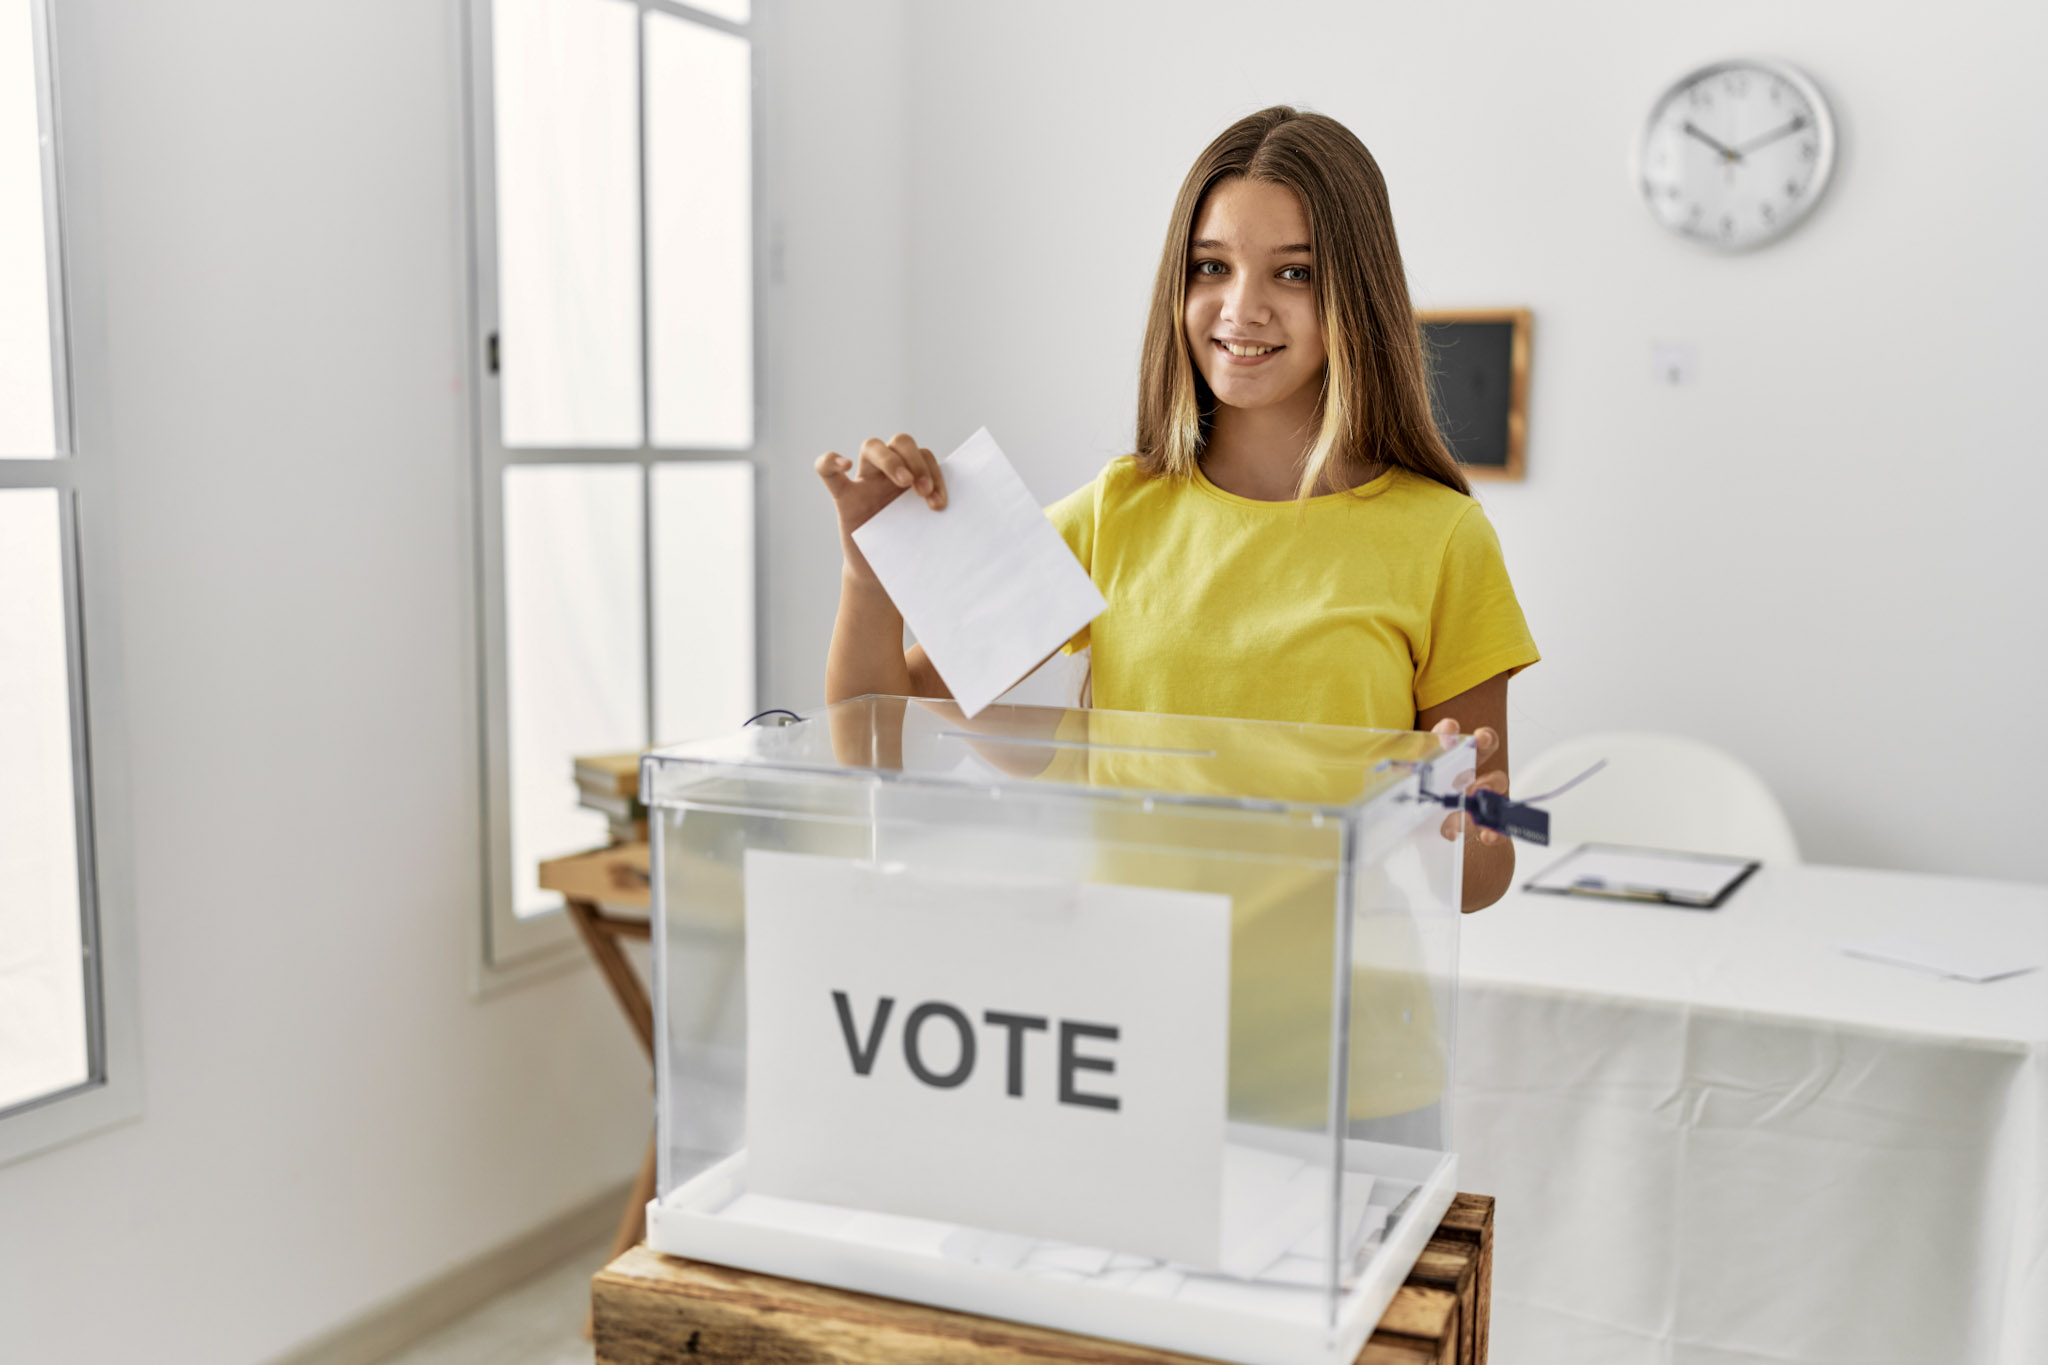 stock photo of a girl smiling while confidently voting at a mock election